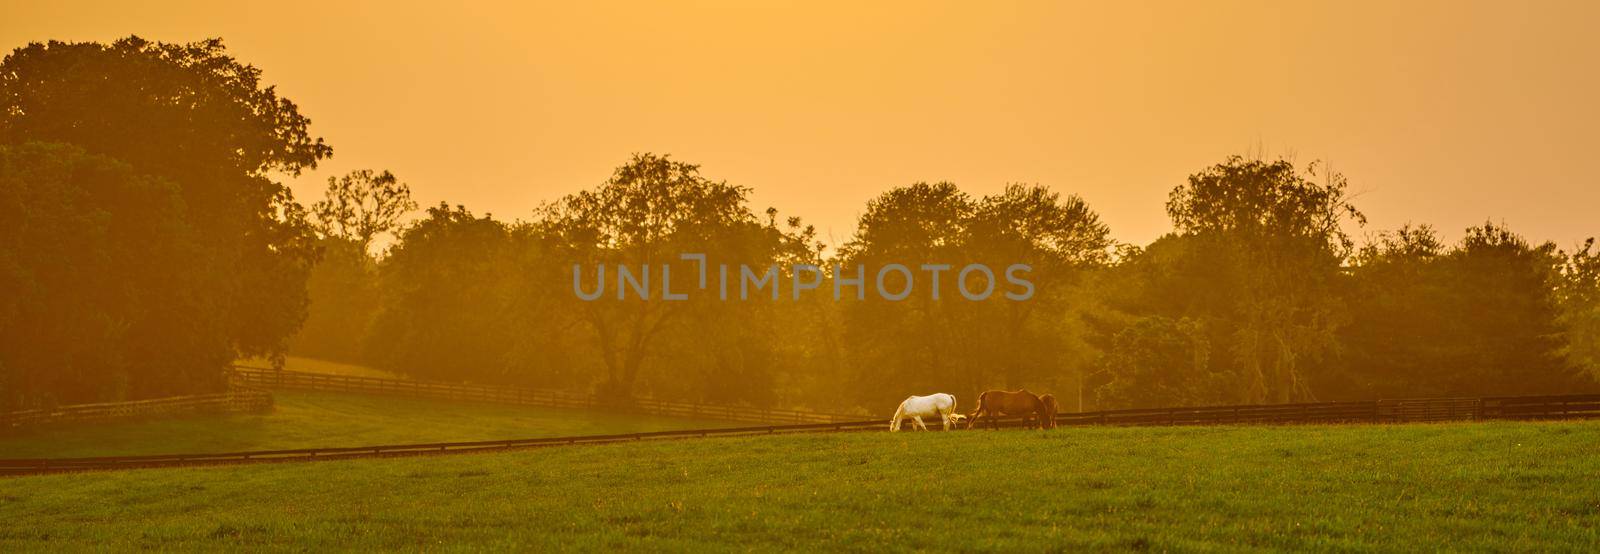 Hazy sunset with horses grazing in a field. by patrickstock